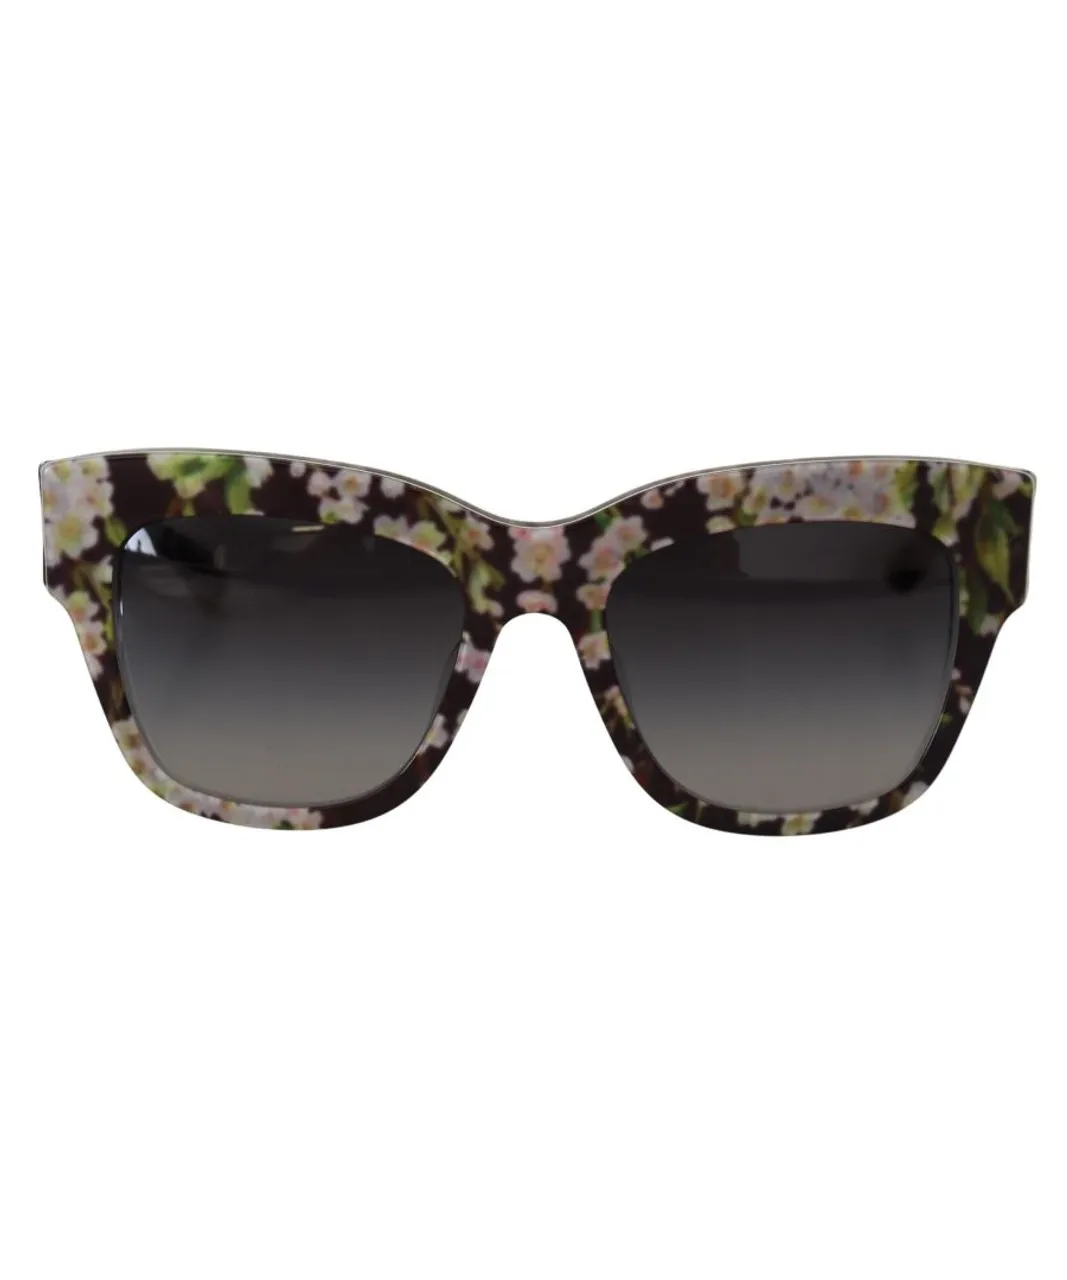 Dolce & Gabbana Womens Floral Acetate Rectangle Shades Sunglasses - Black - One